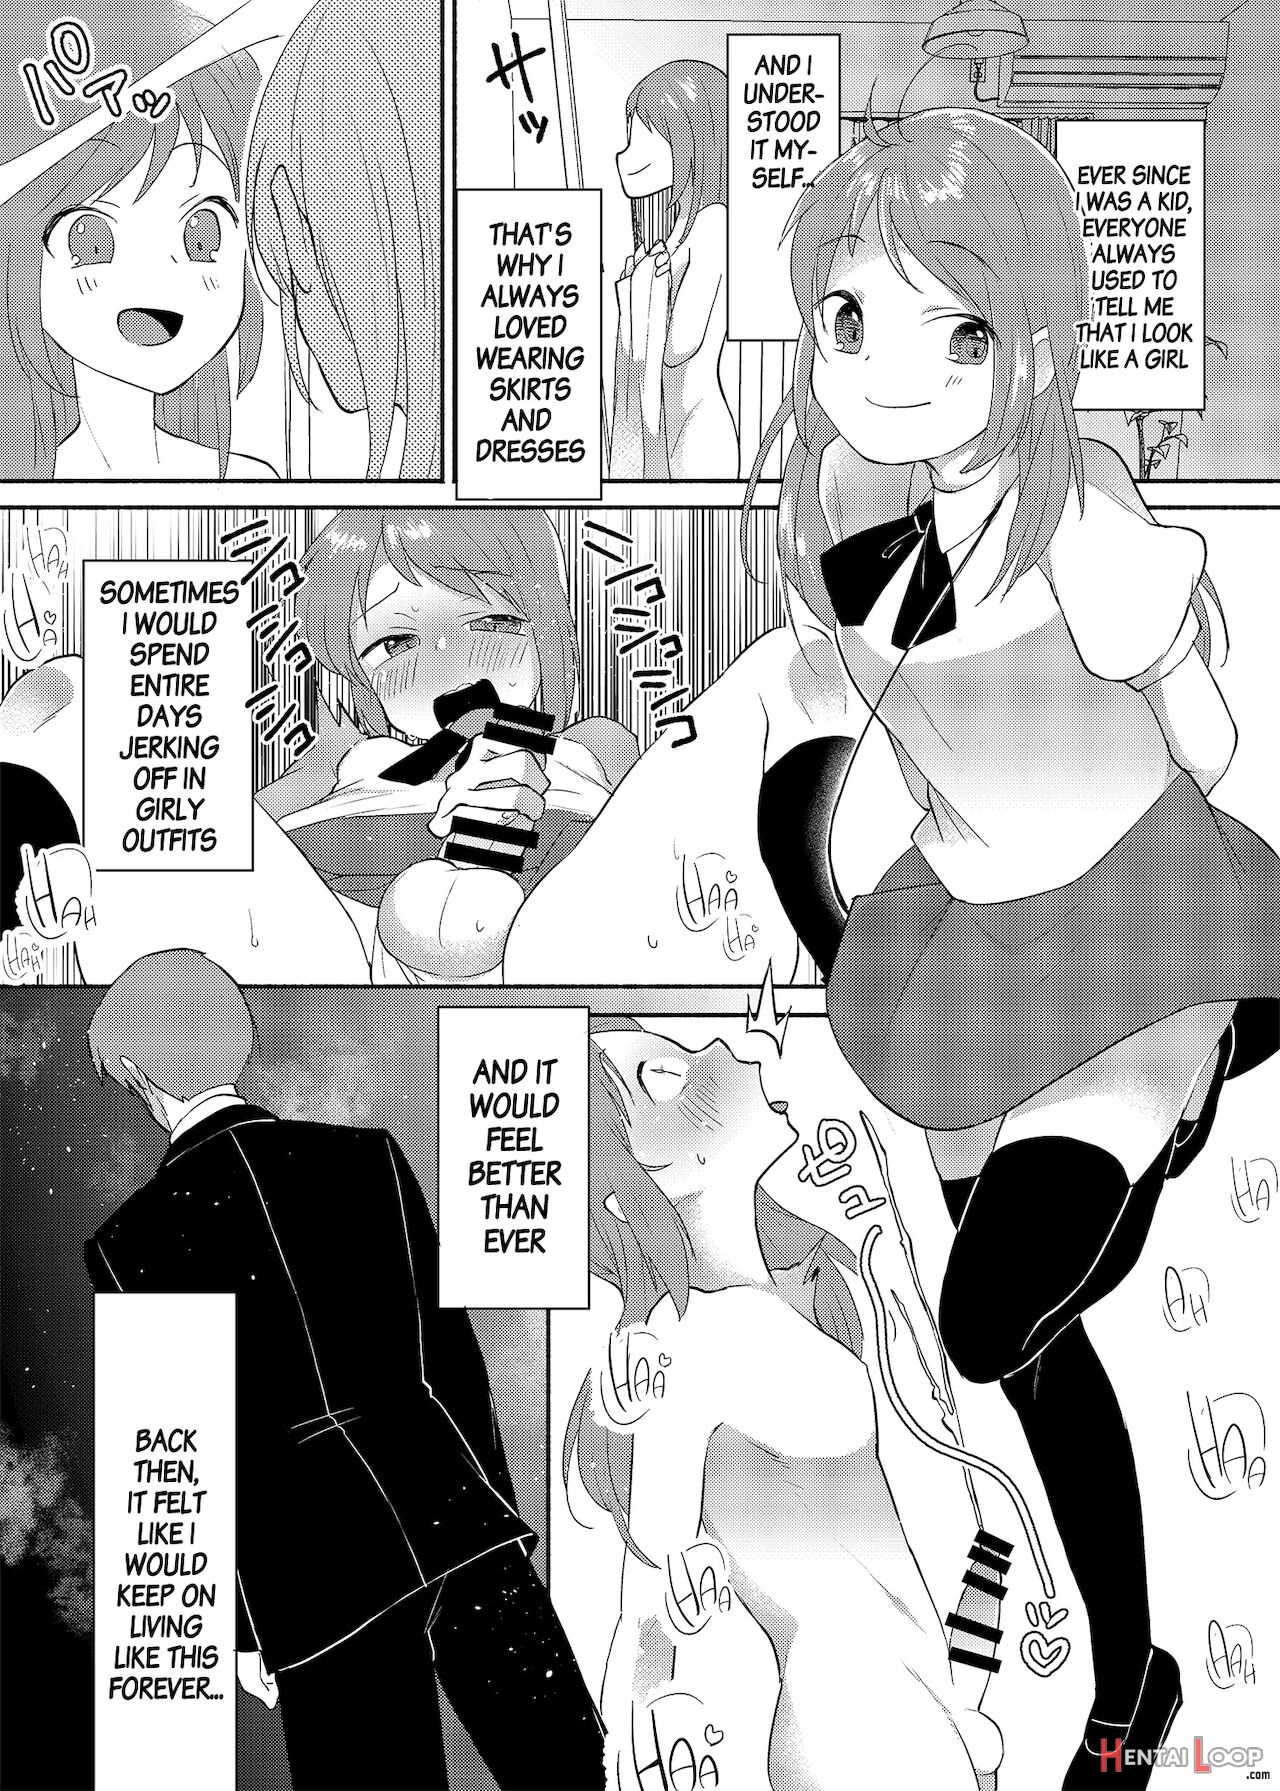 Crossdressing Fetish Gone Out Of Hand page 1